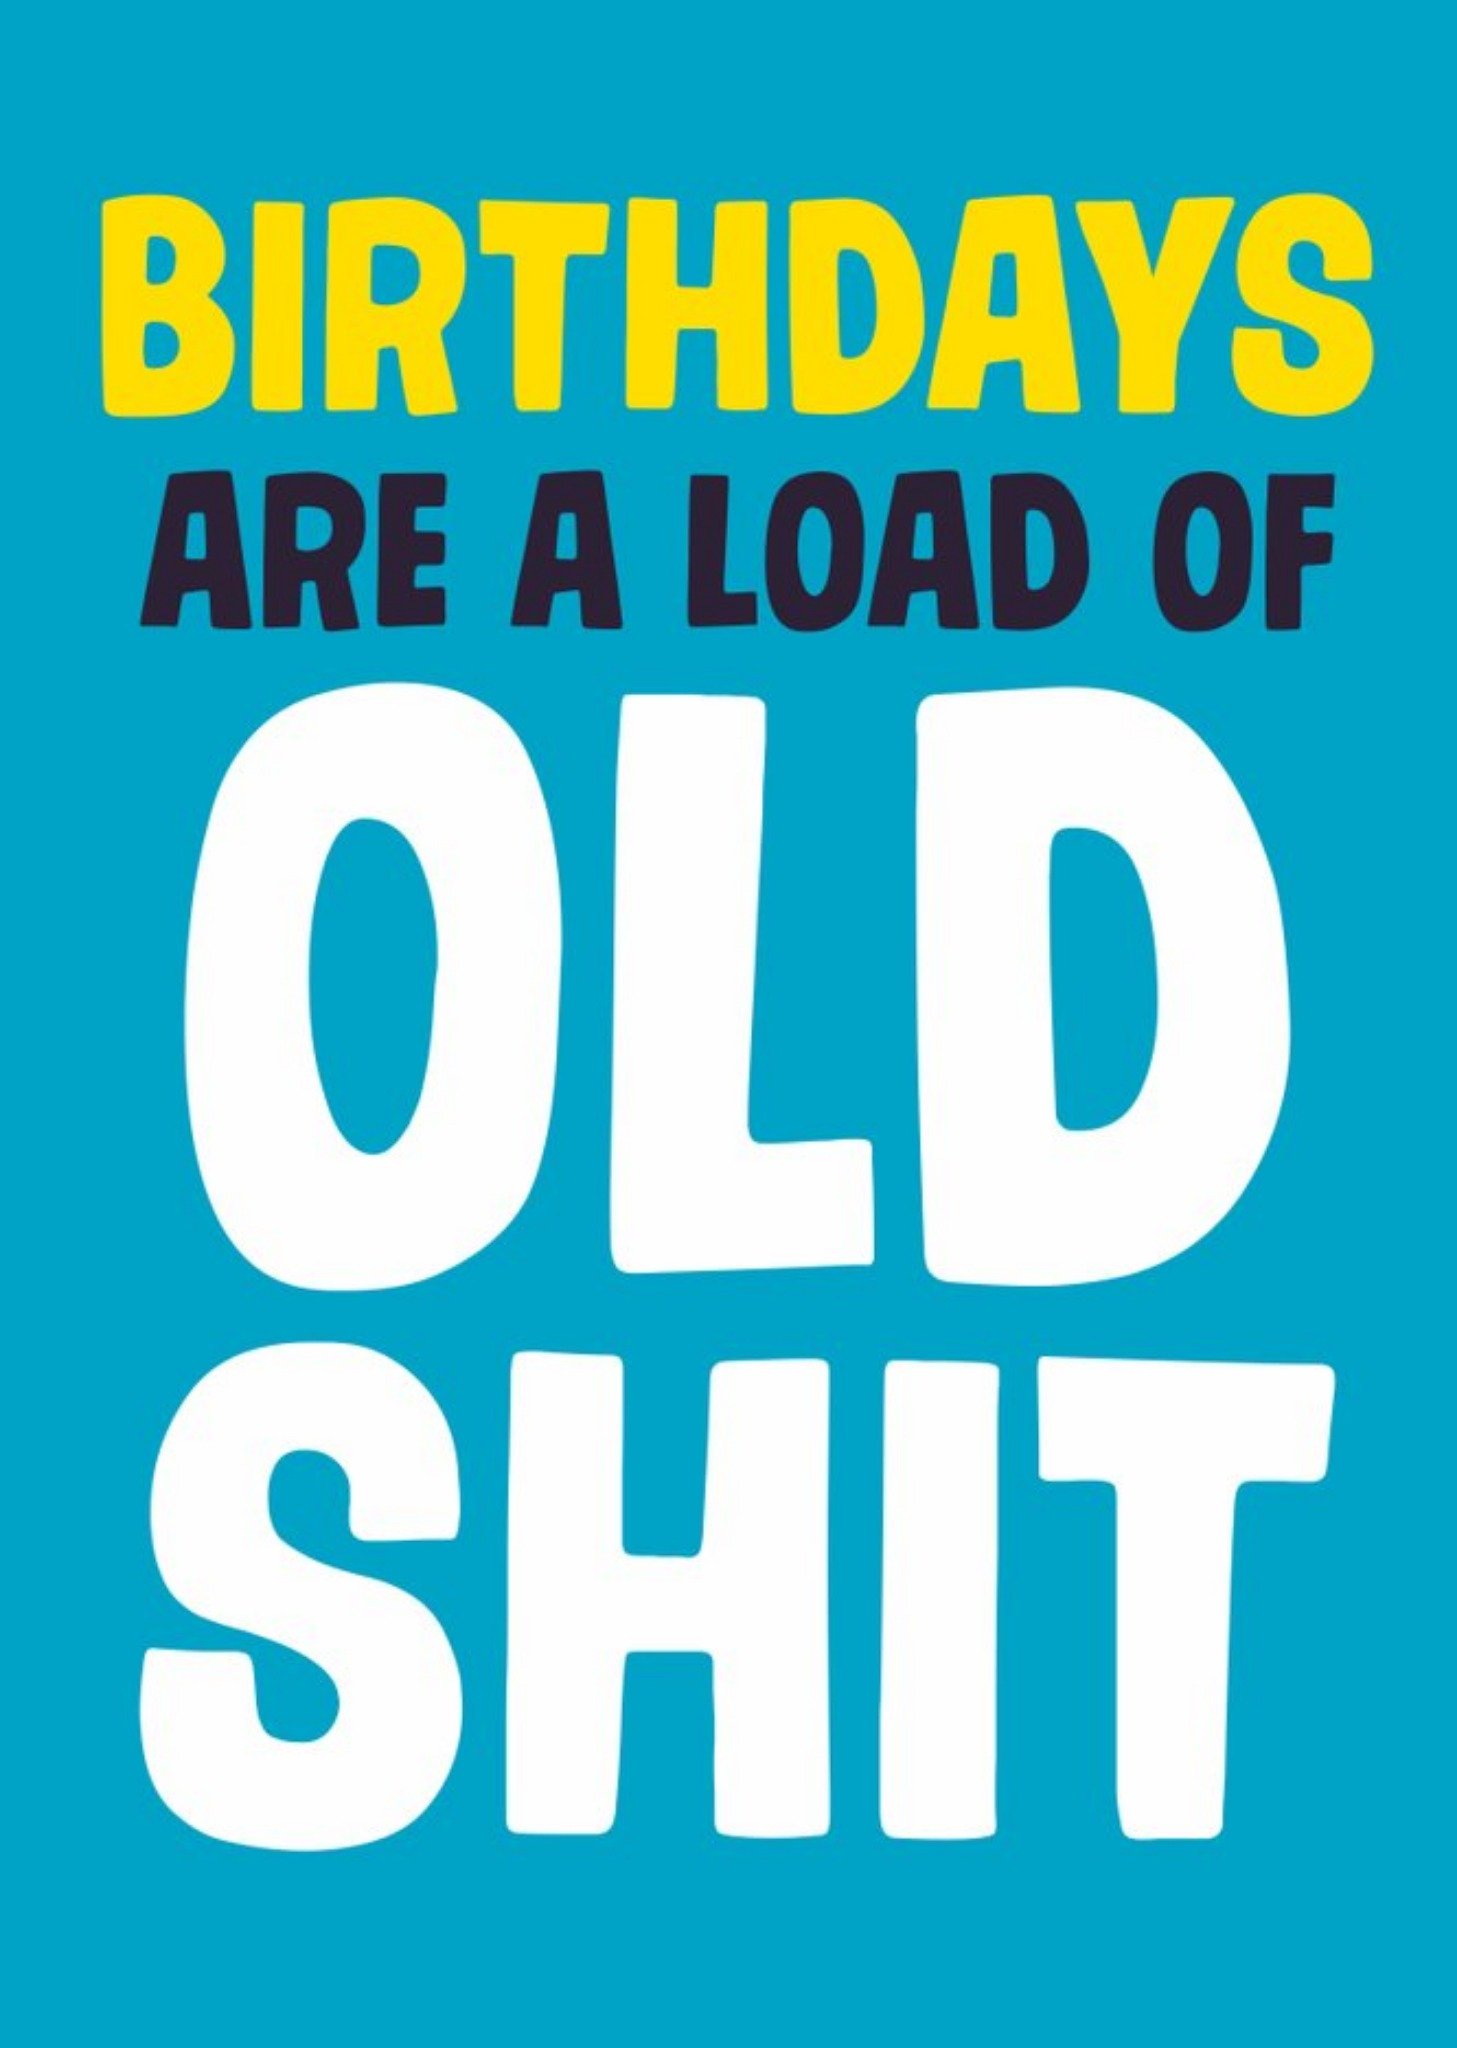 Moonpig Dean Morris Birthdays Are A Load Of Old Shit Funny Birthday Card Ecard